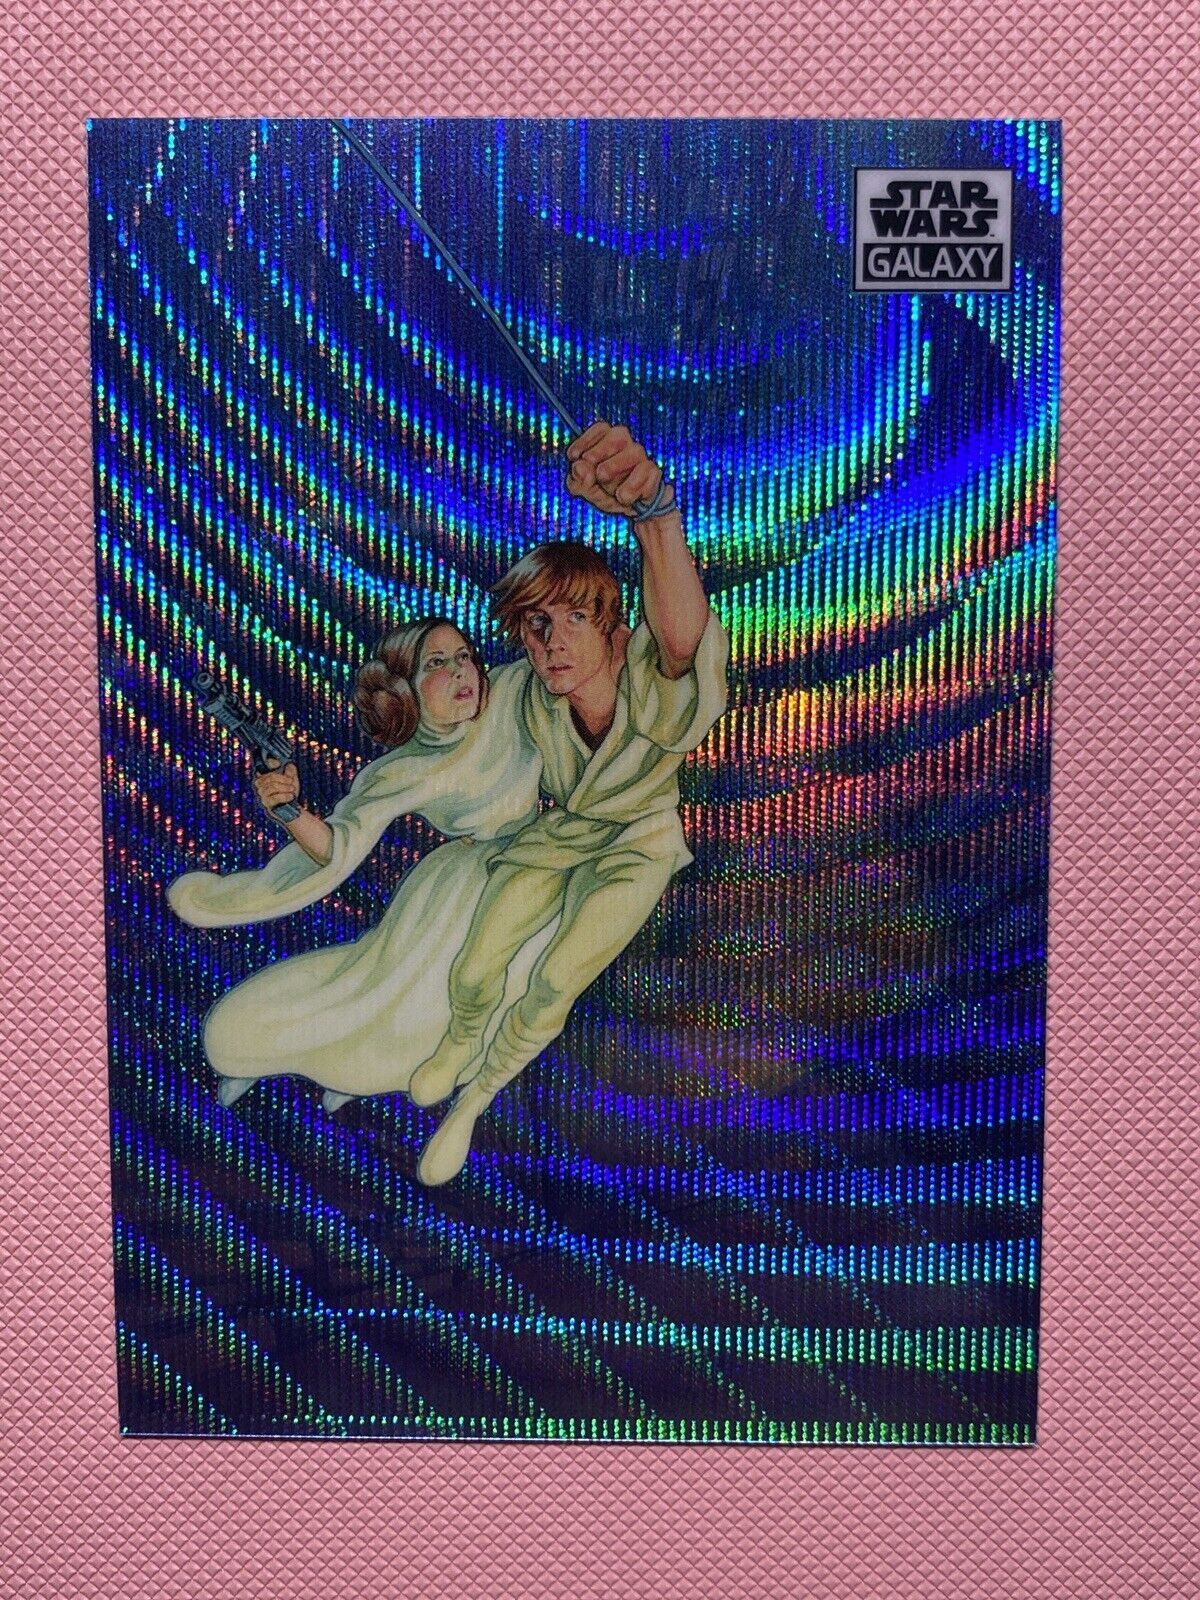 2021 TOPPS STAR WARS GALAXY CHROME #28 LEAP OF FAITH WAVE REFRACTOR #/99